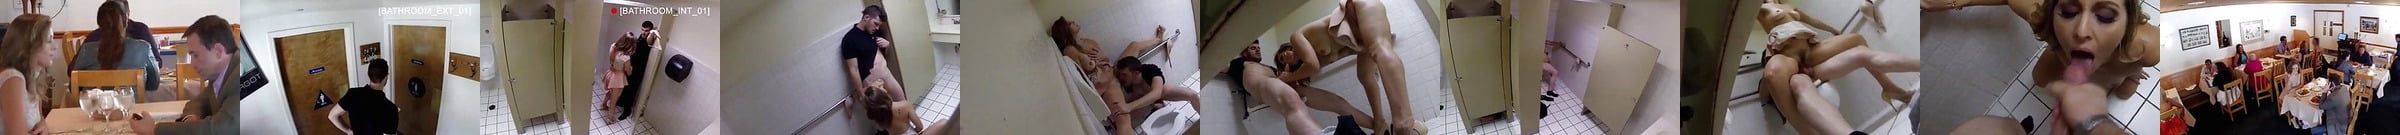 Public Restroom Sex With A Cheating Wife And The Waiter